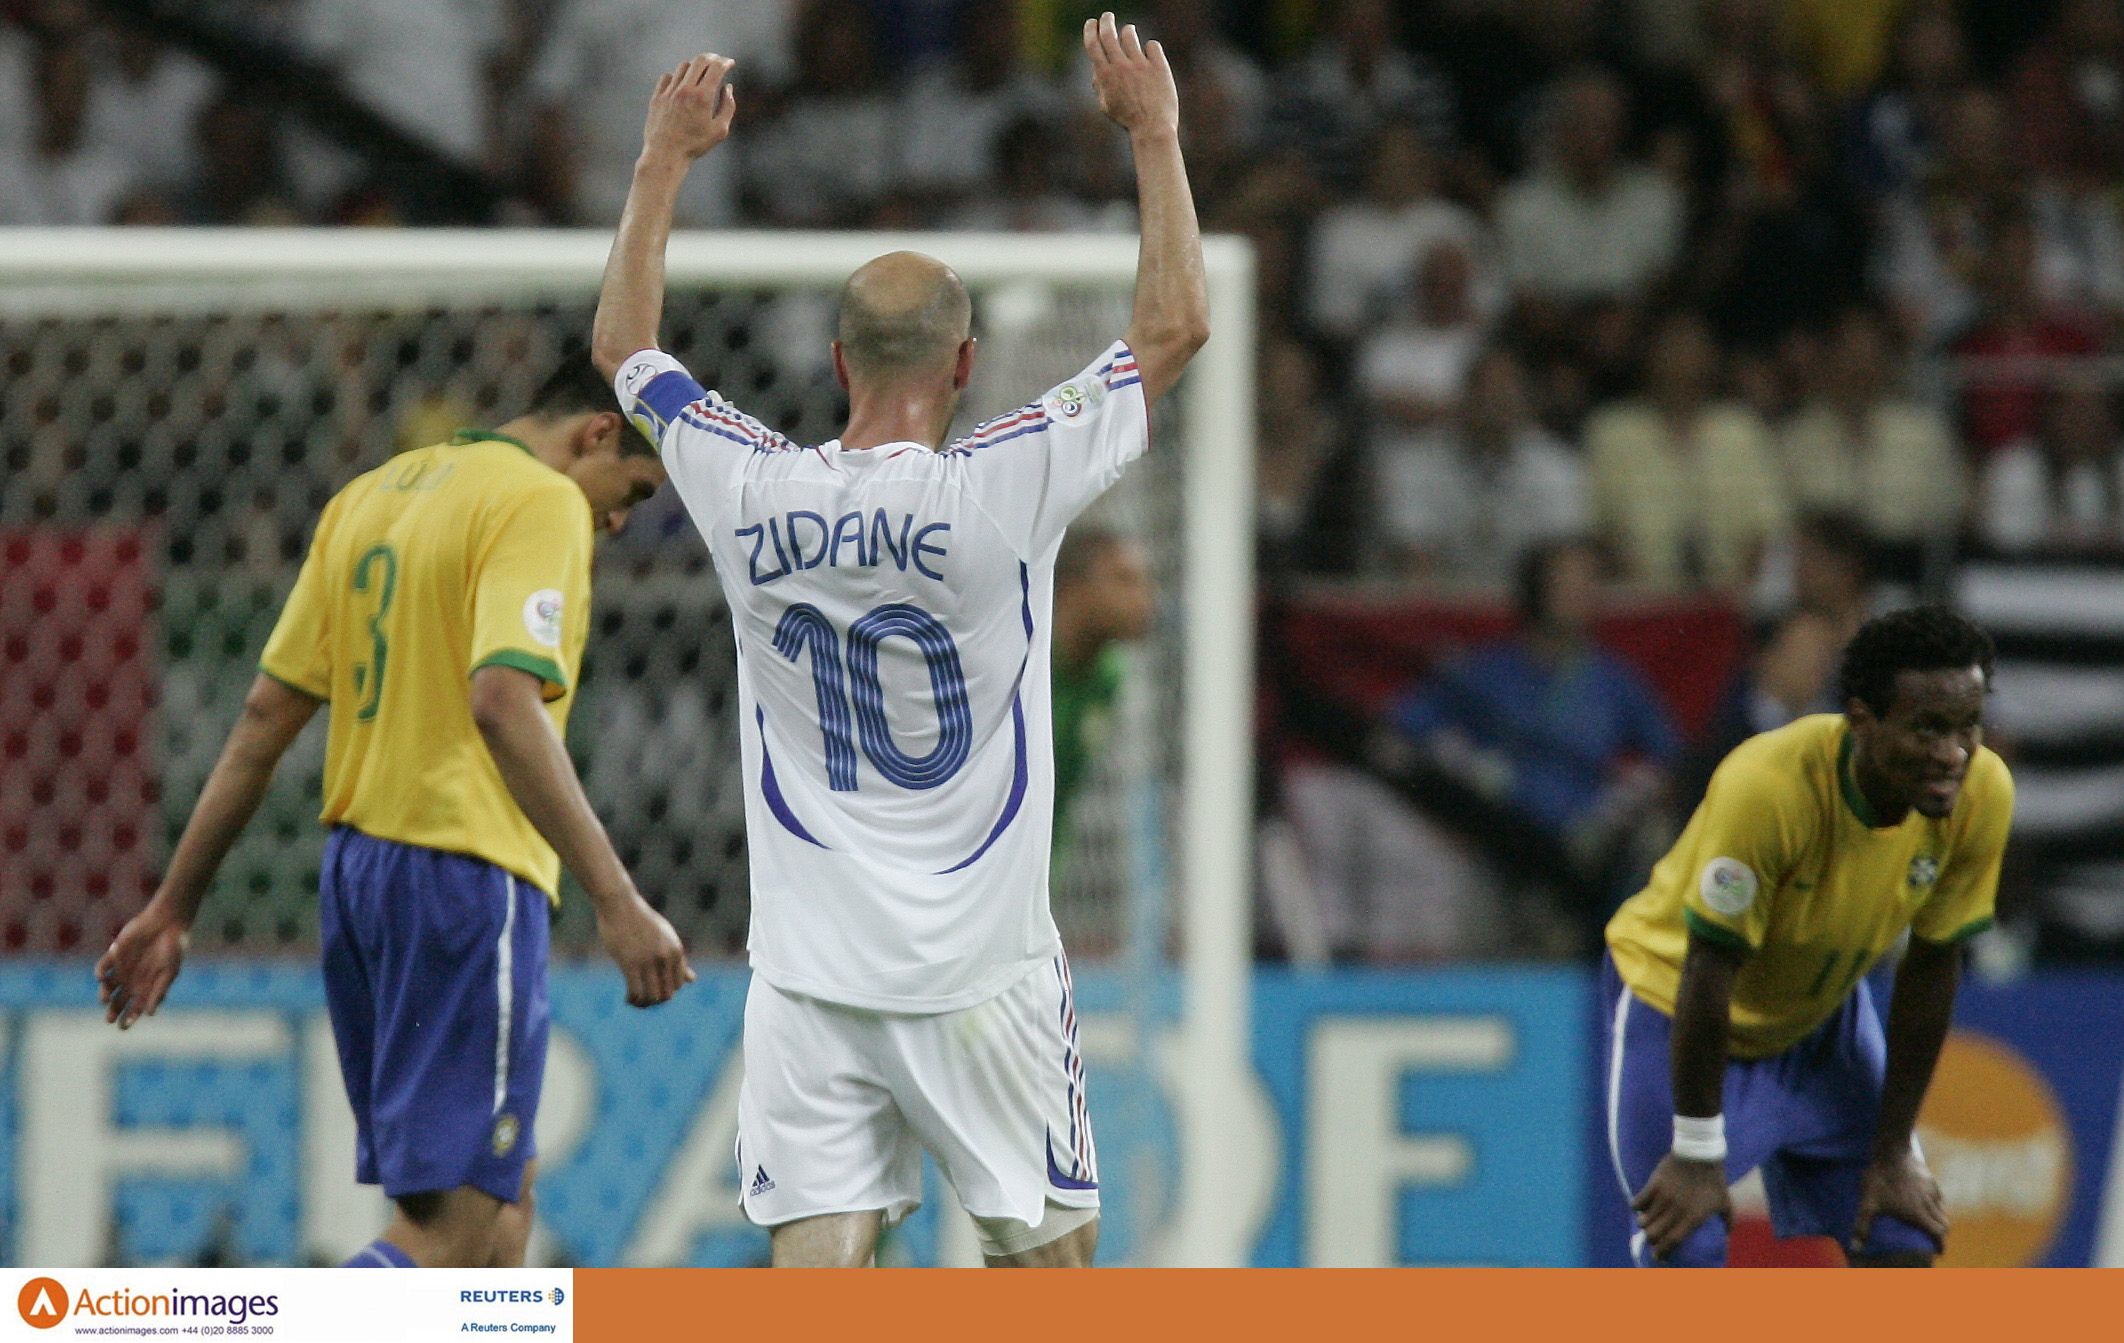 Zinedine Zidane in action for France vs Brazil at the 2006 World Cup